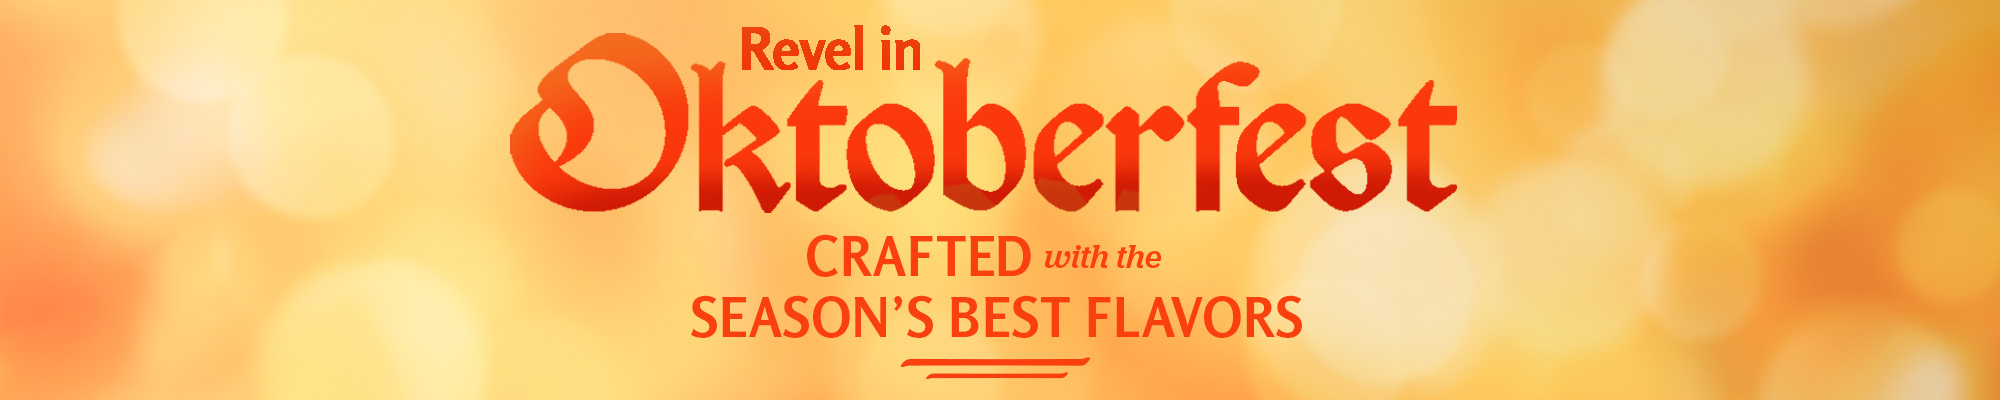 Revel in Oktoberfest! Crafted with the Season's Best Flavors